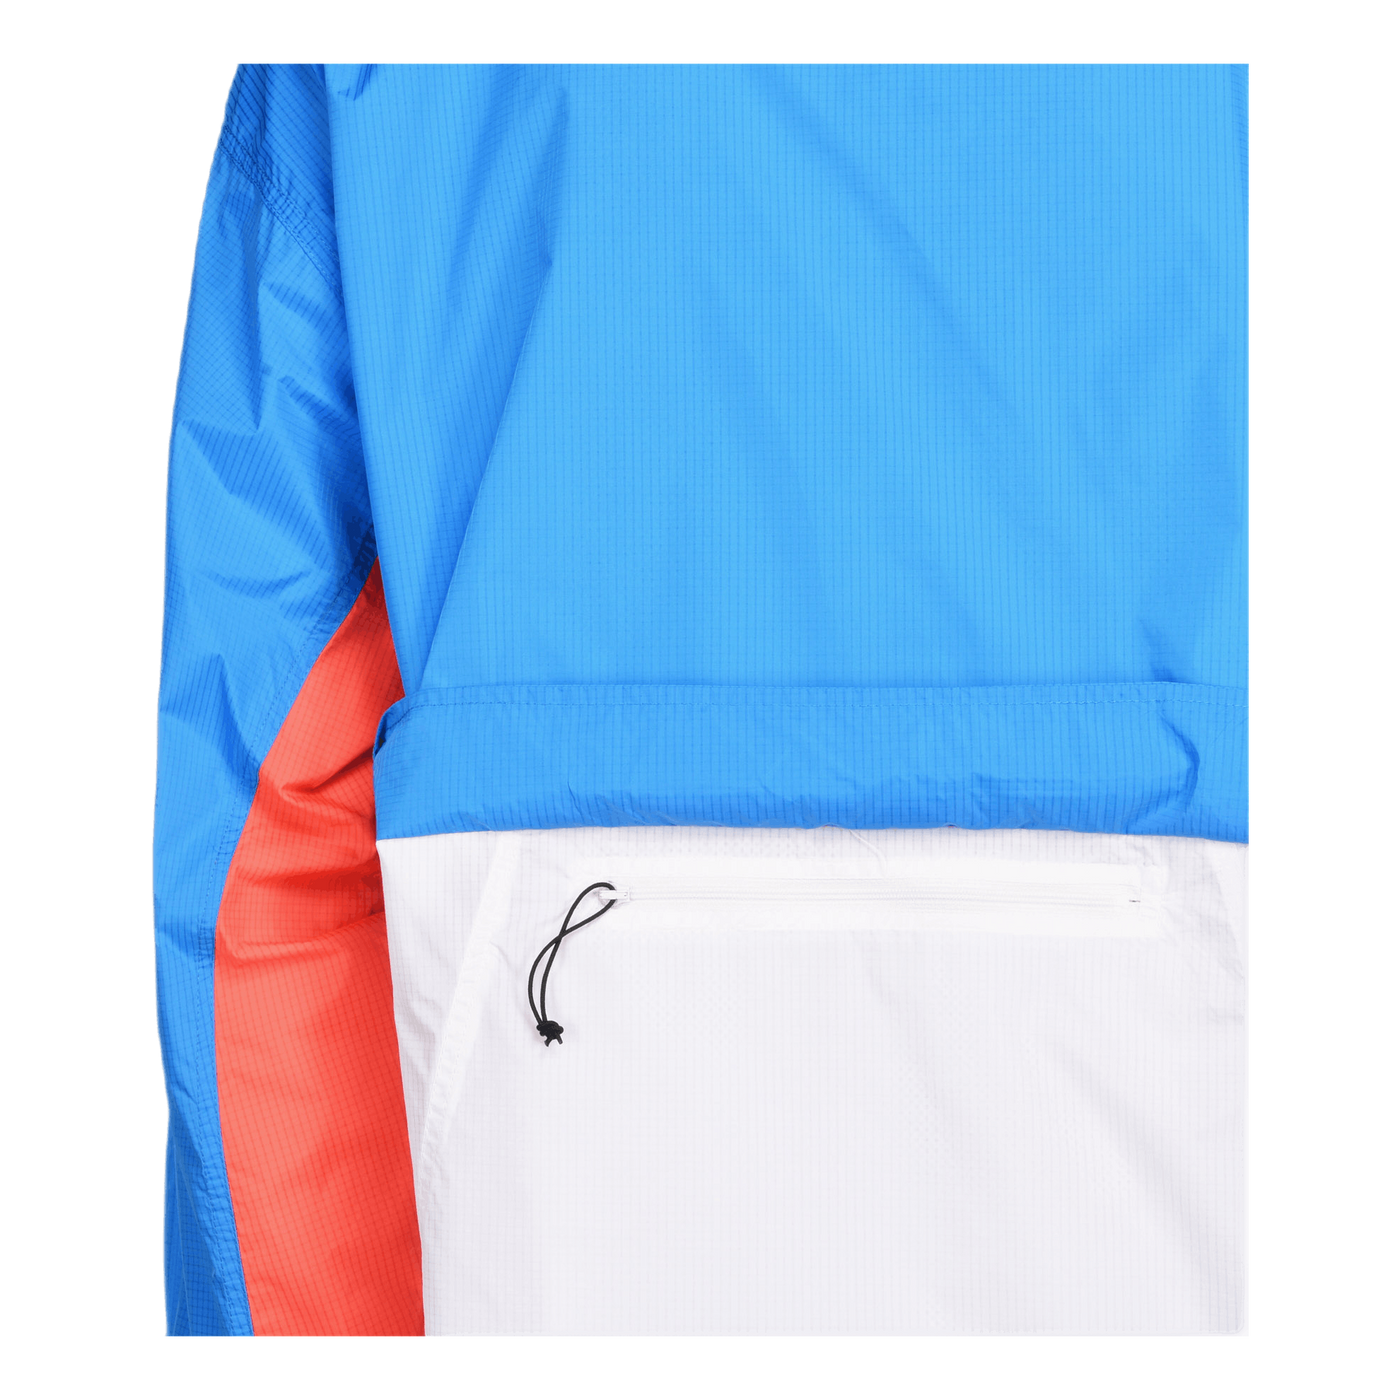 Persp-active Pullover Jacket Blue